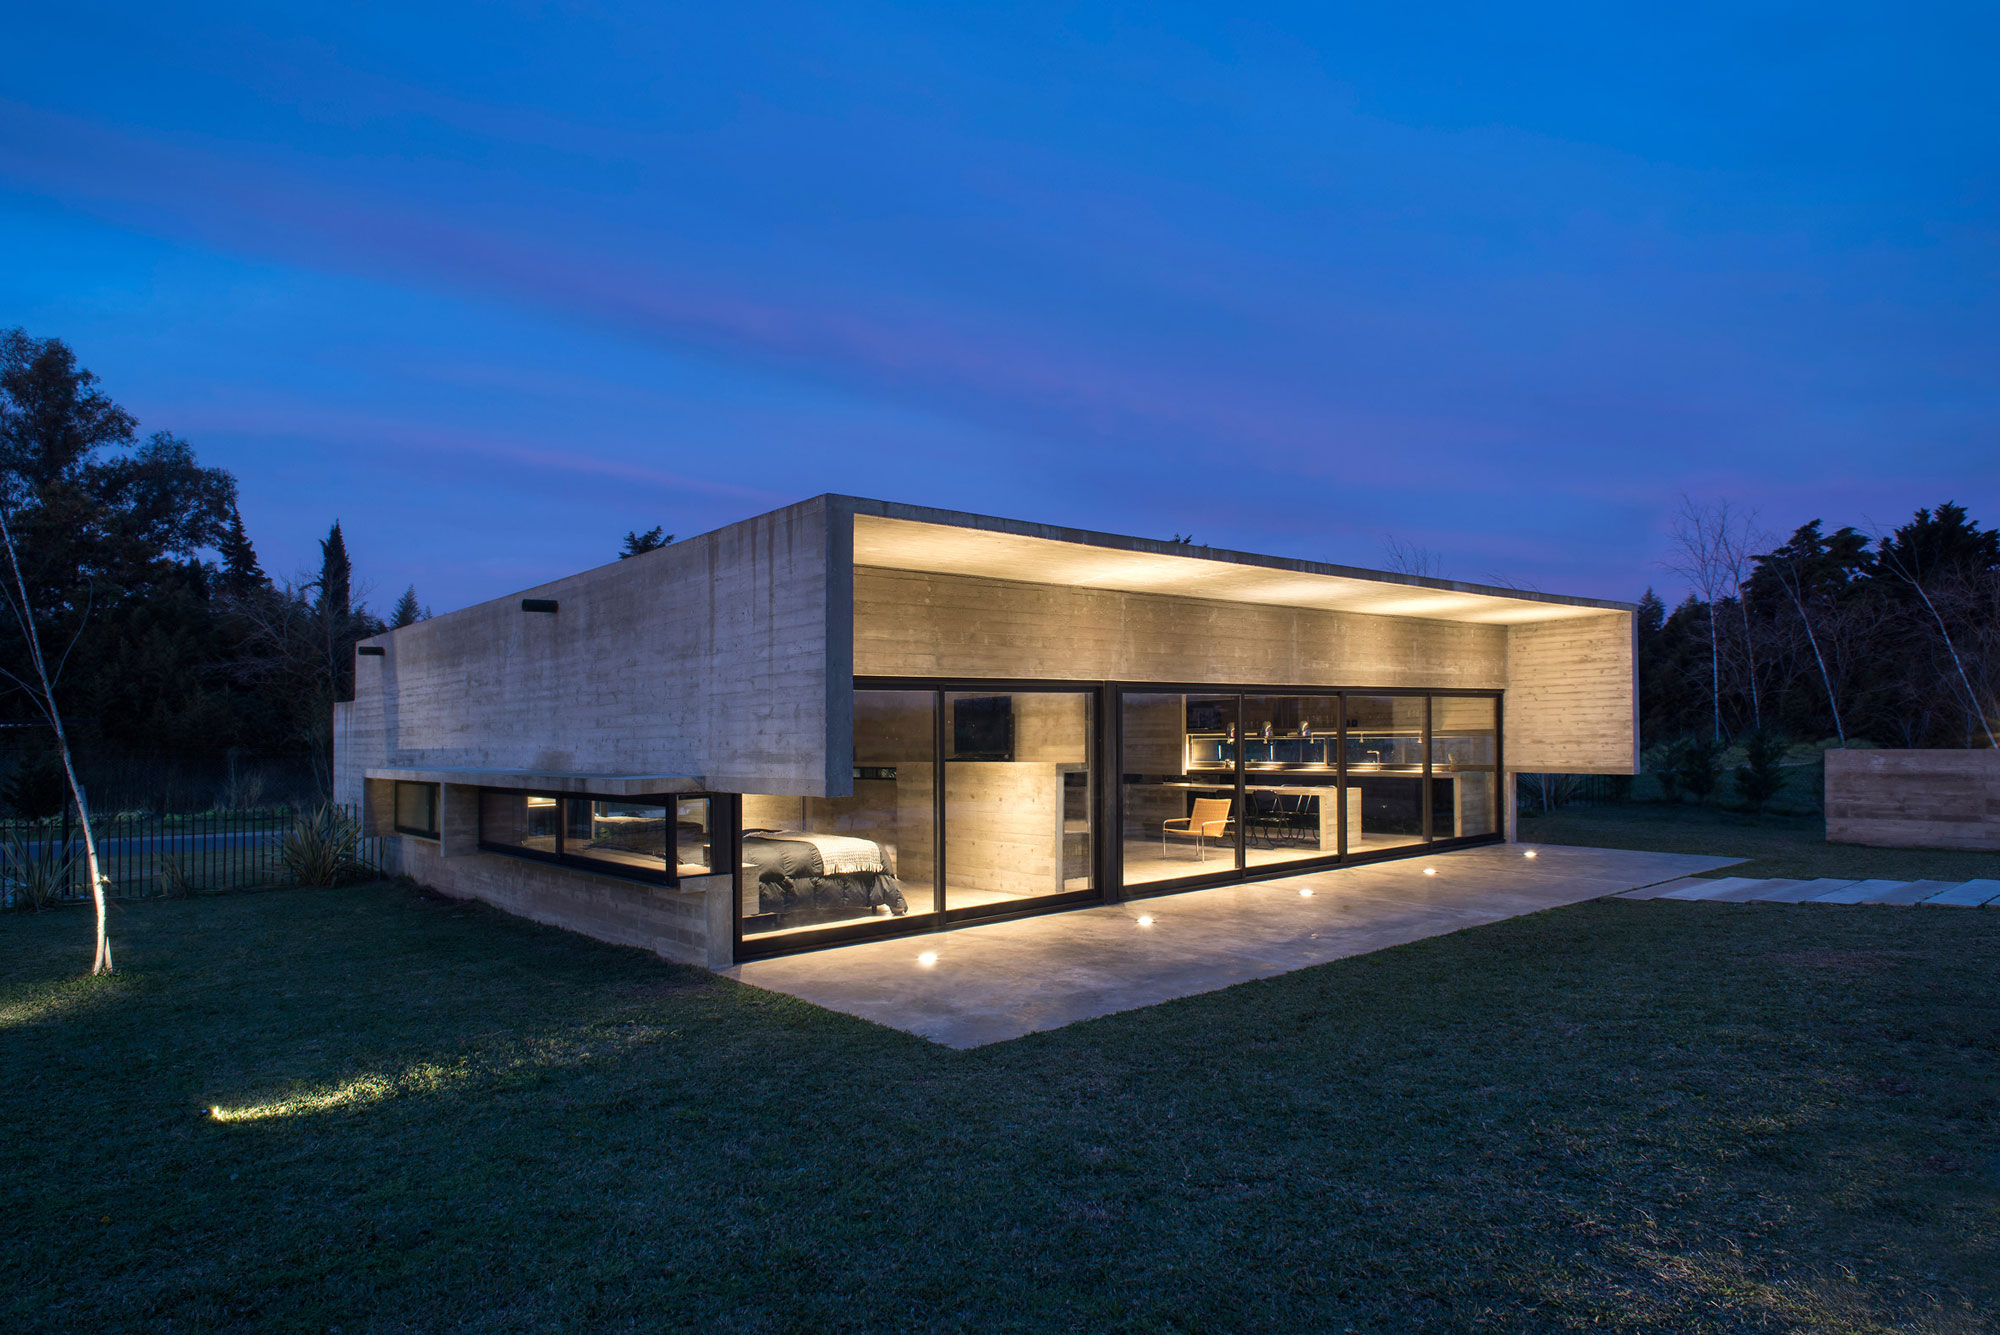 Spectacular Concrete House Surrounded by Fields and Vegetation